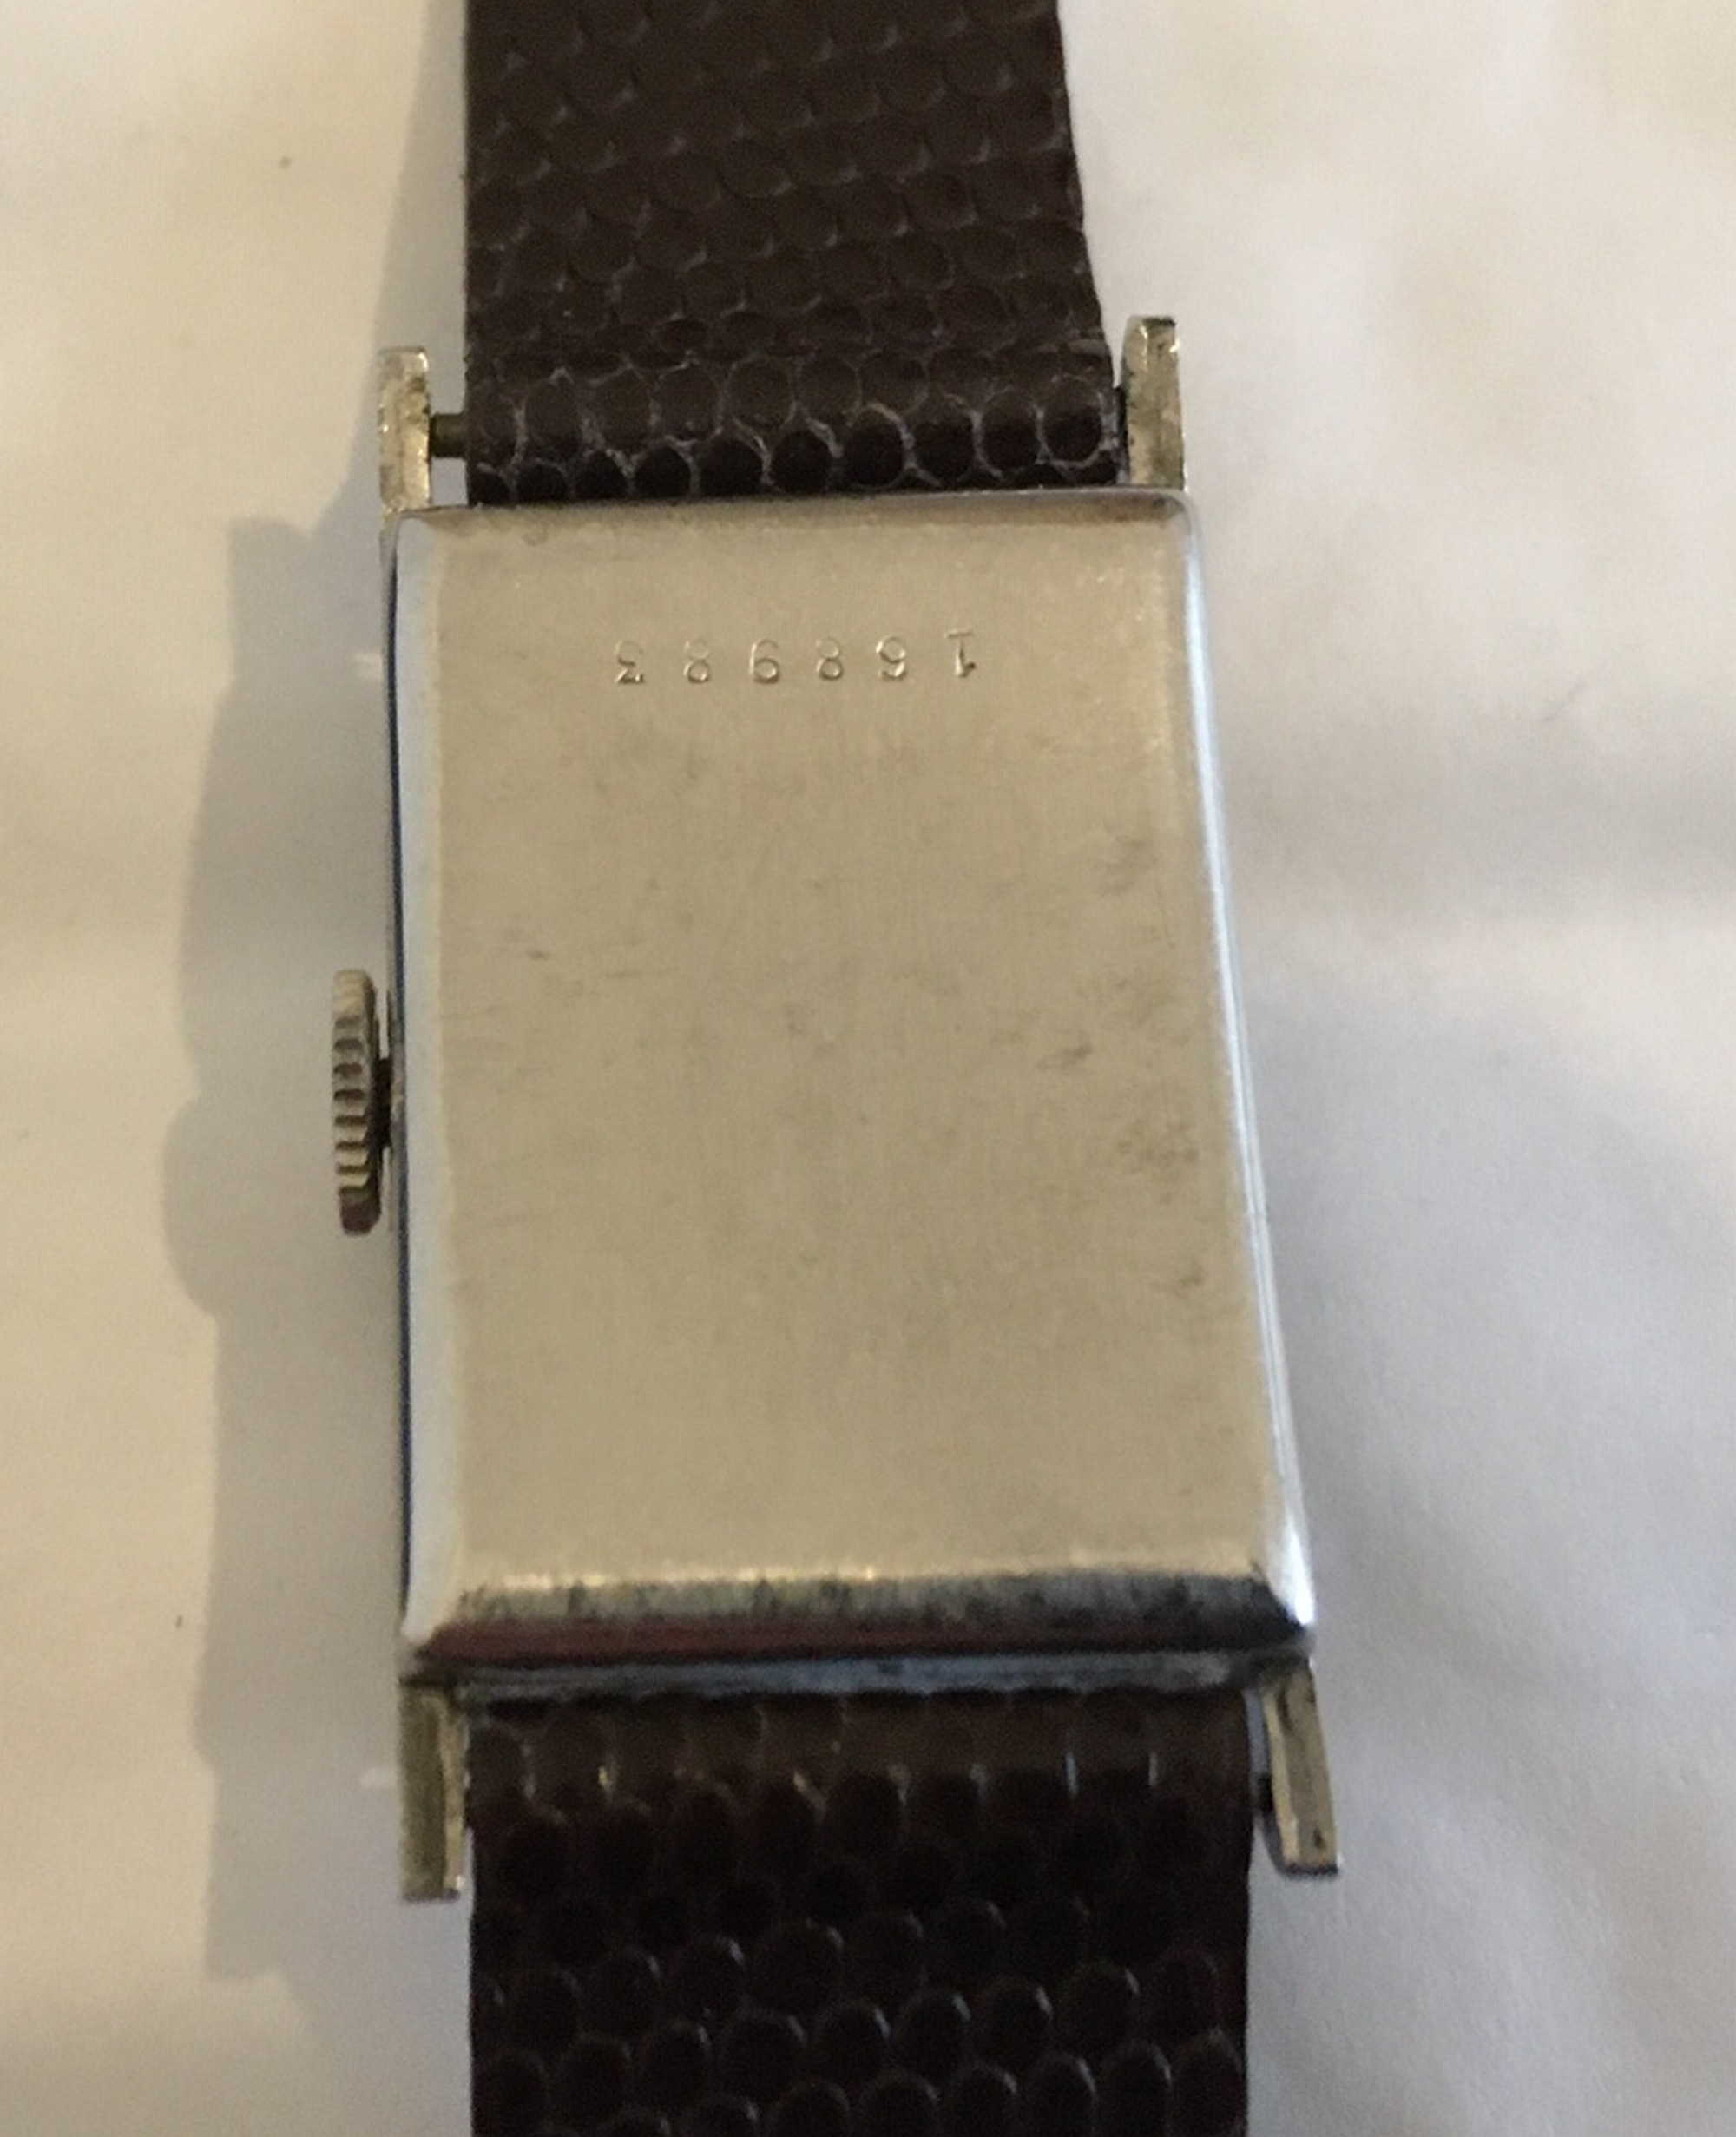 Boxed Art Deco Watch(Marvin) working order. - Image 3 of 3